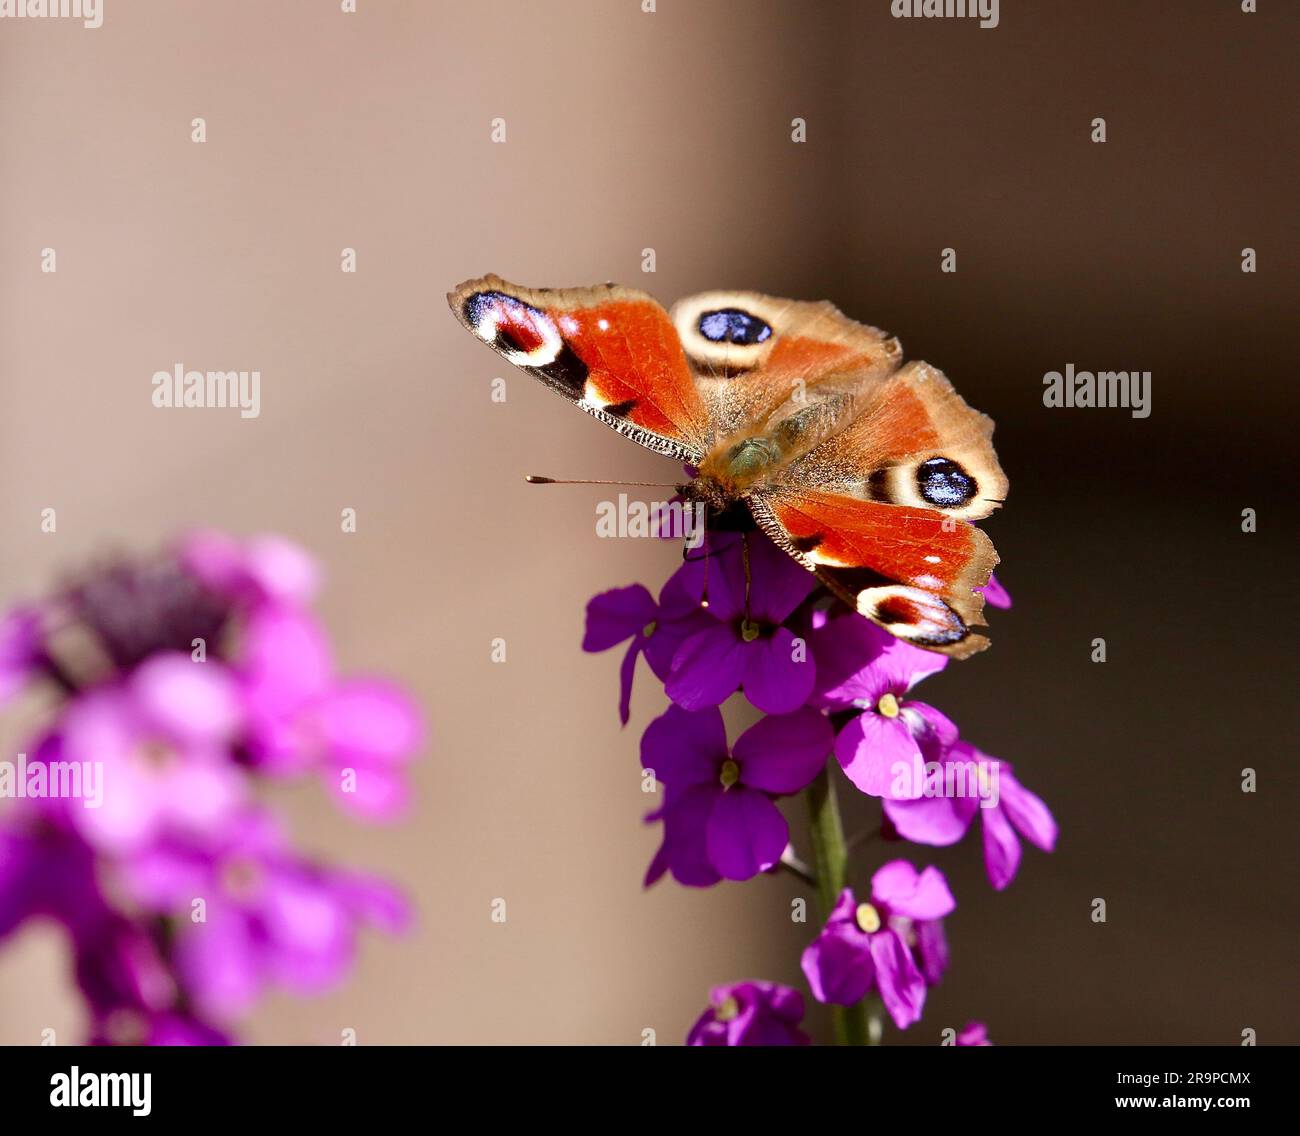 Peacock butterfly resting on dame’s violet flowers Stock Photo